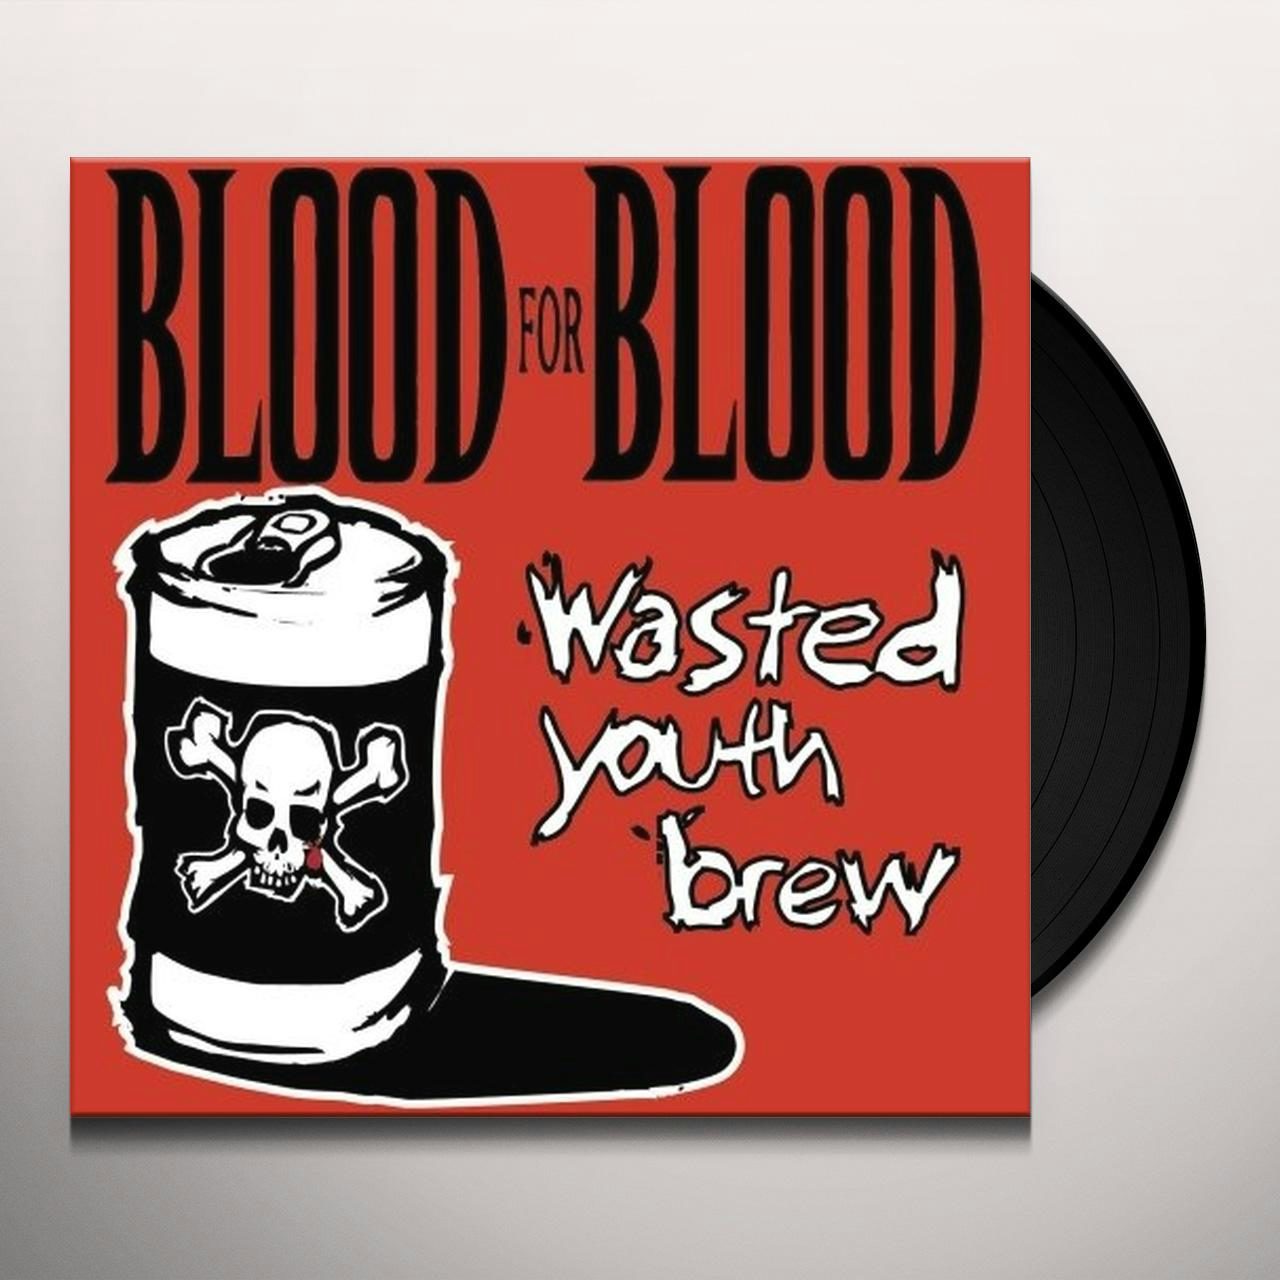 Same blood. Wasted Youth пиво. Blood for Blood Band. I have come for your Blood.